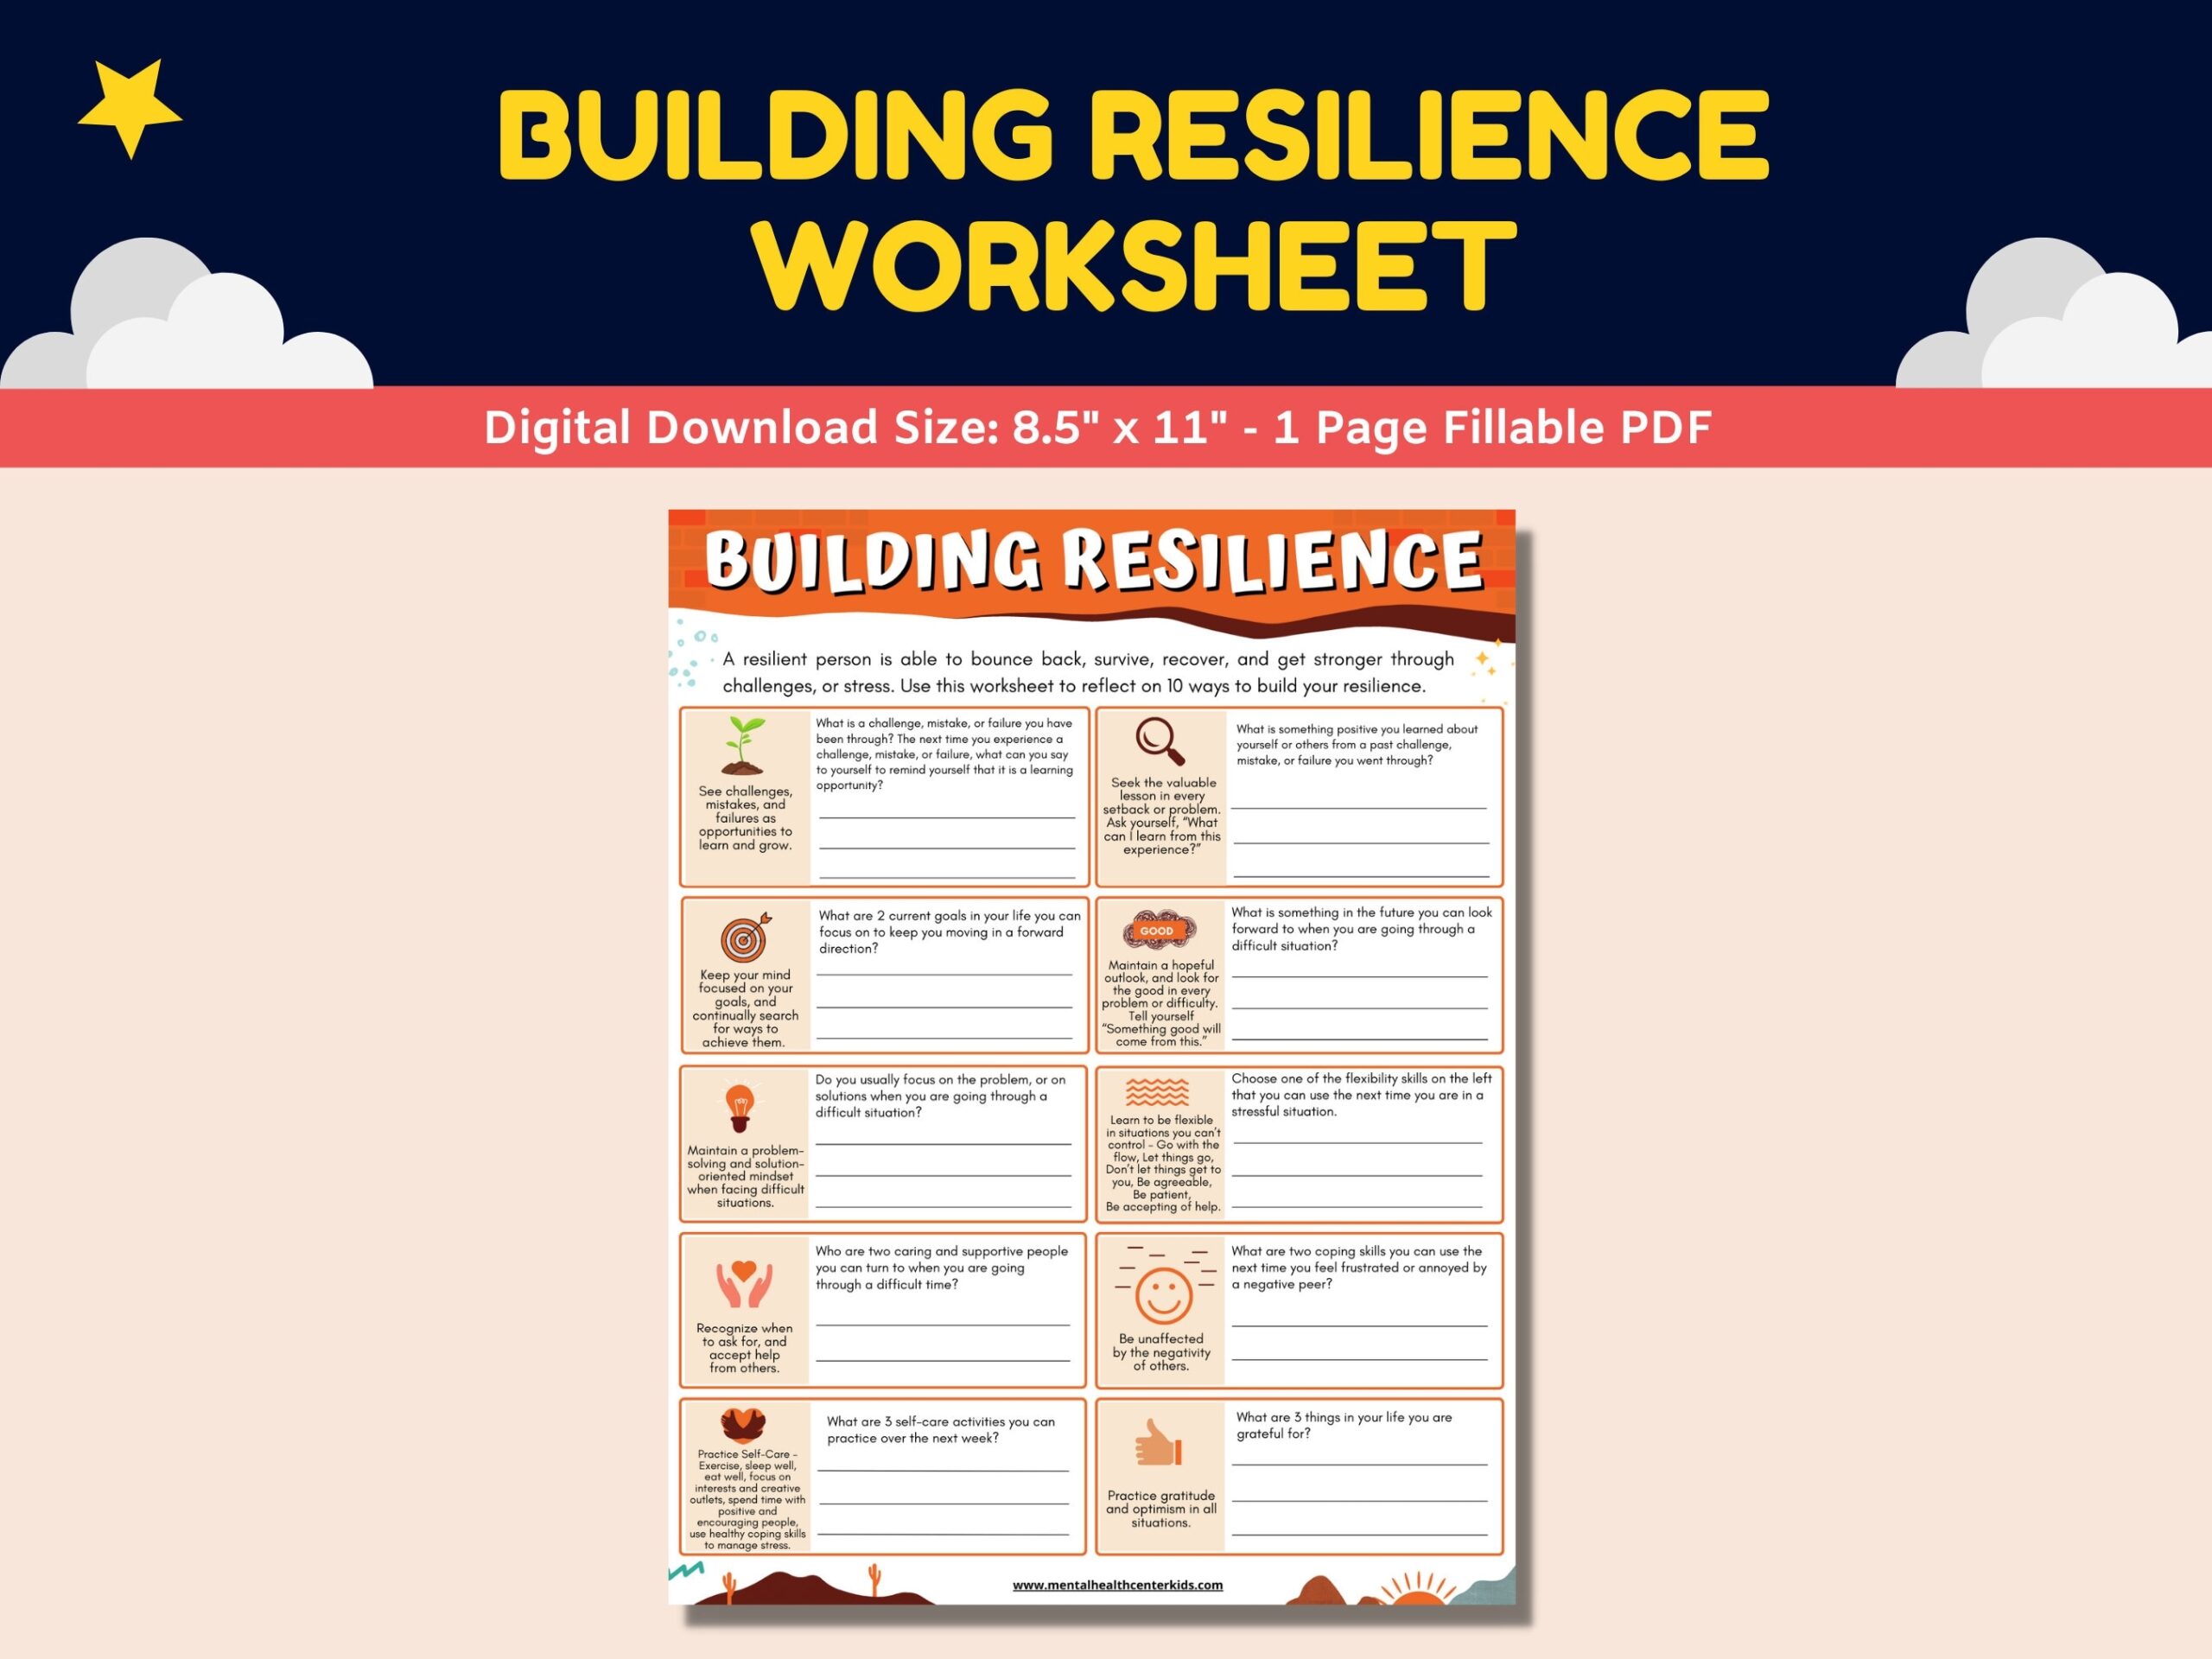 Resilience Worksheet Trauma Coping Skills stress Management ptsd adversity Printable For Kids Teens Trauma Awareness Mental Health Therapy Etsy